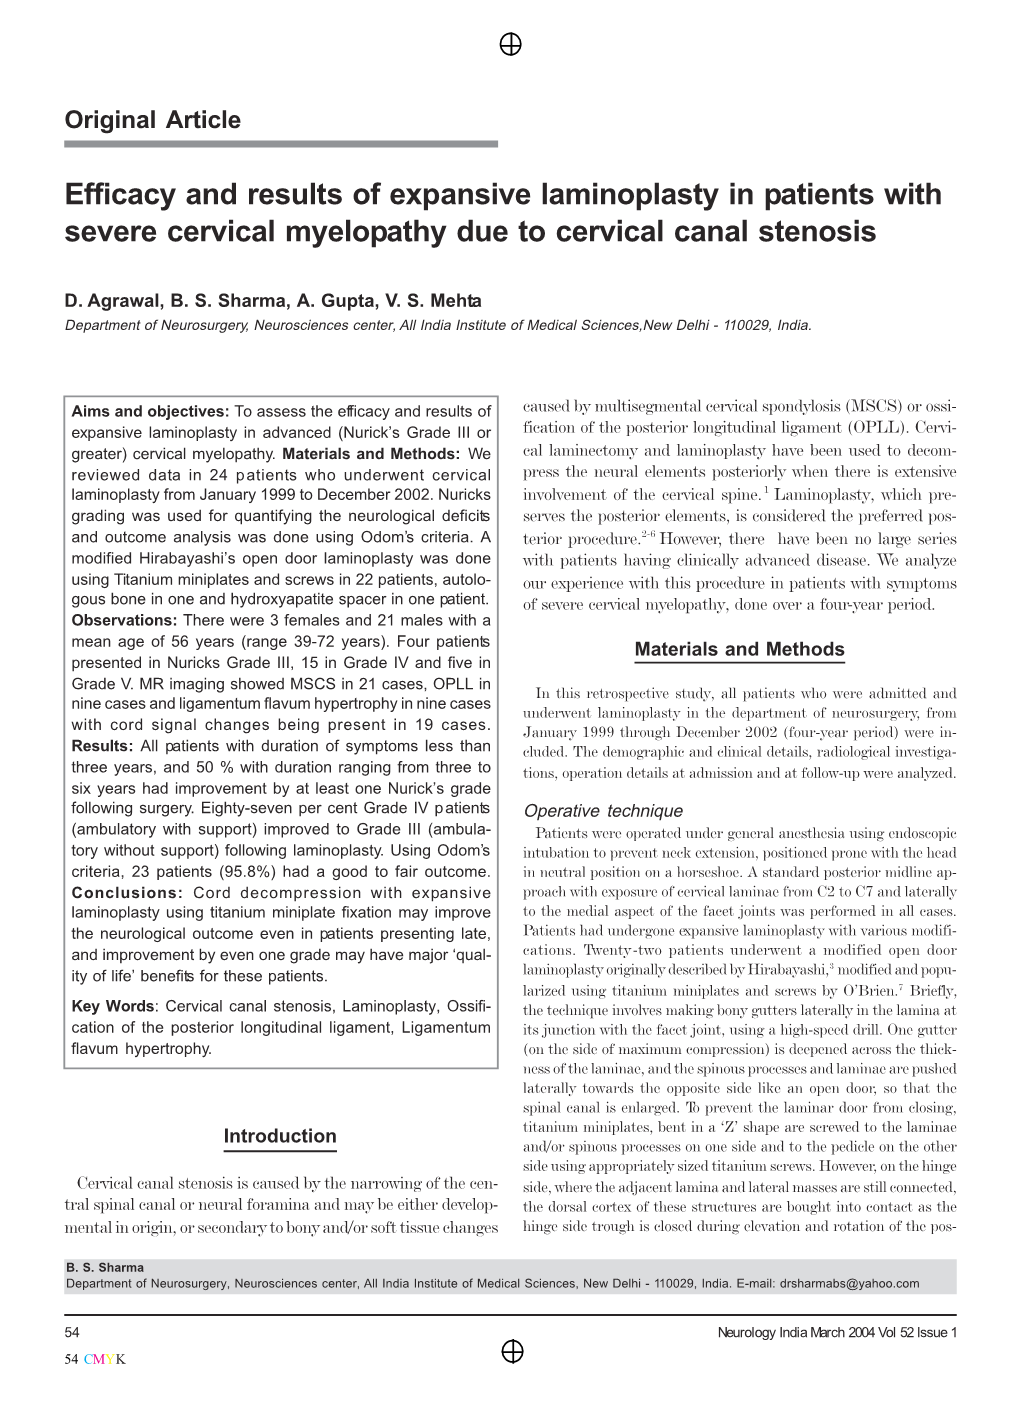 Efficacy and Results of Expansive Laminoplasty in Patients with Severe Cervical Myelopathy Due to Cervical Canal Stenosis